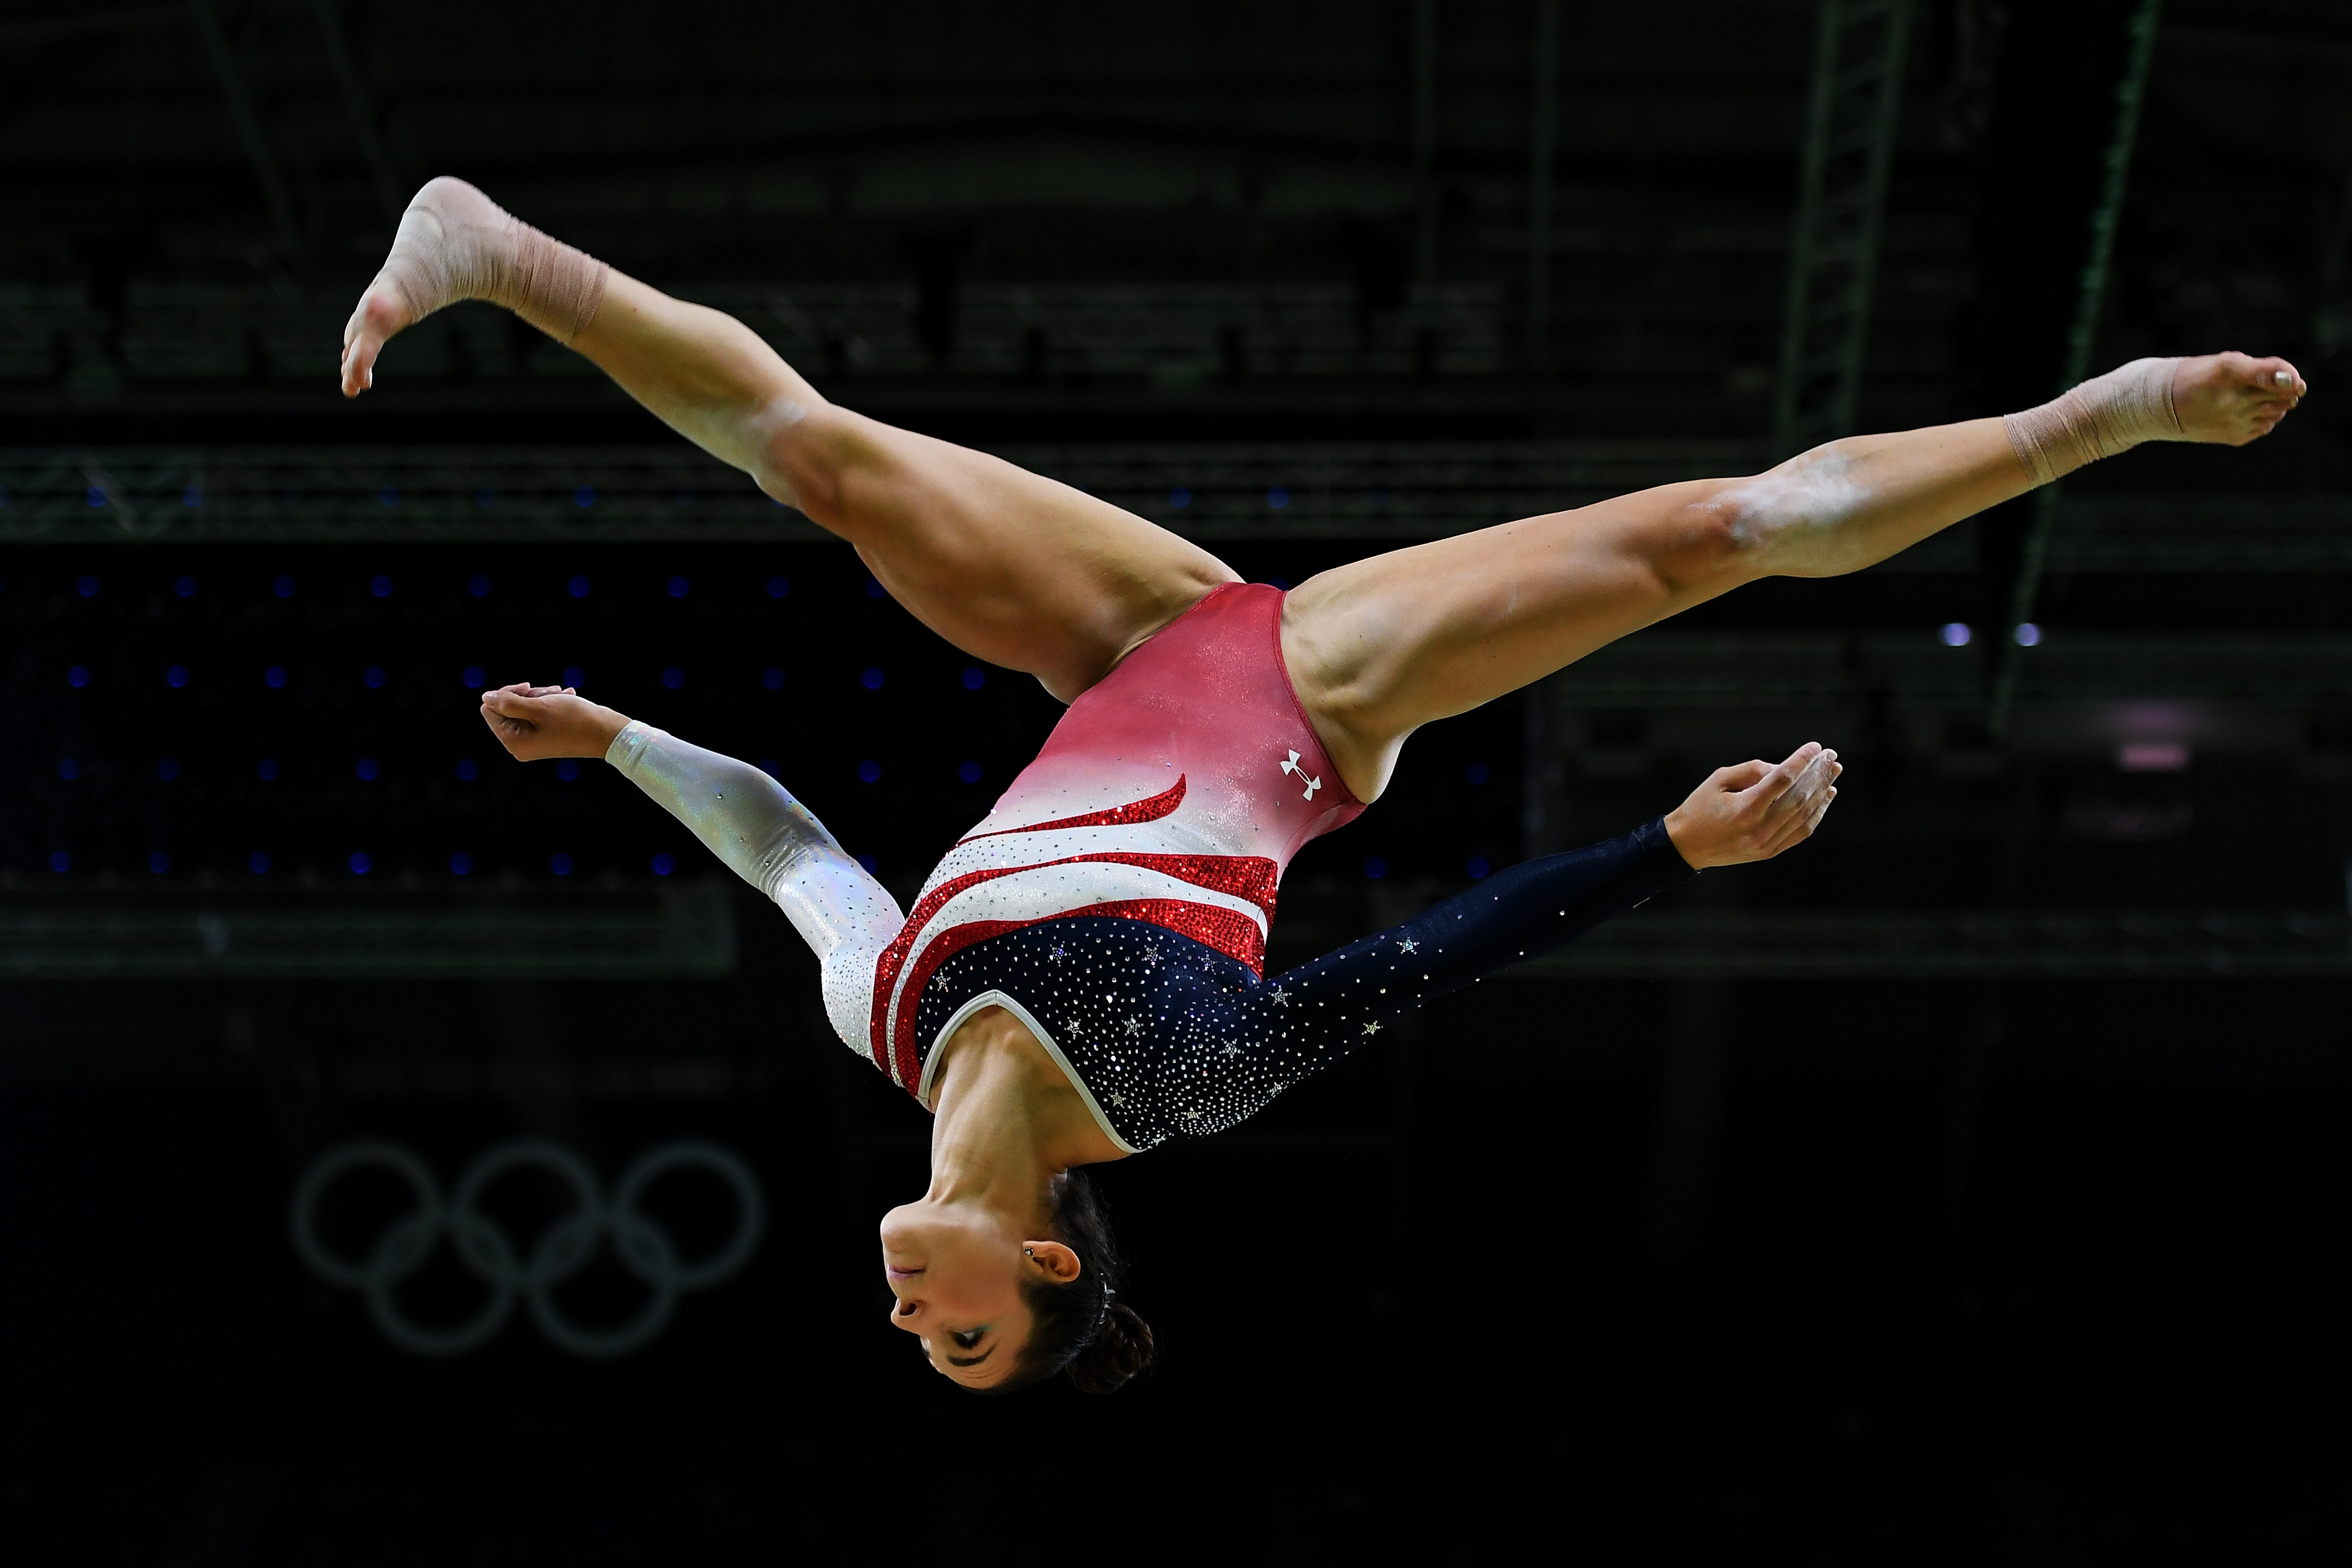 RIO DE JANEIRO, BRAZIL - AUGUST 09: Alexandra Raisman of the United States competes on the balance beam during the Artistic Gymnastics Women's Team Final on Day 4 of the Rio 2016 Olympic Games at the Rio Olympic Arena on August 9, 2016 in Rio de Janeiro, Brazil. (Photo by Laurence Griffiths/Getty Images)